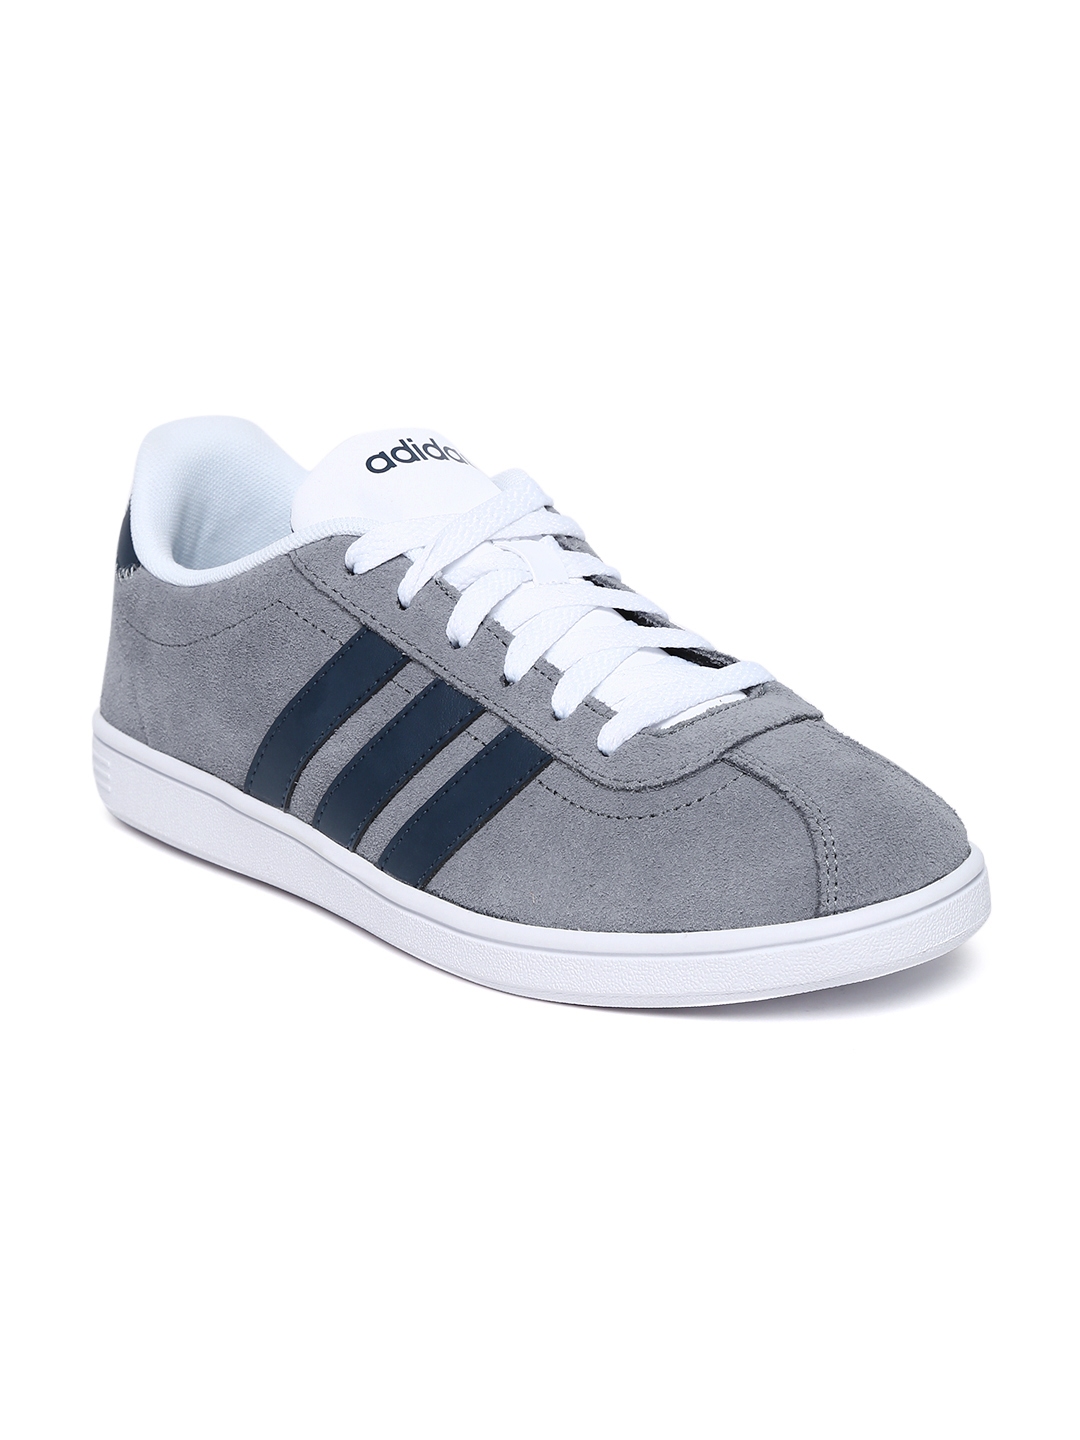 Buy ADIDAS NEO Men Grey VL Court Suede Casual Shoes - Casual Shoes for ...